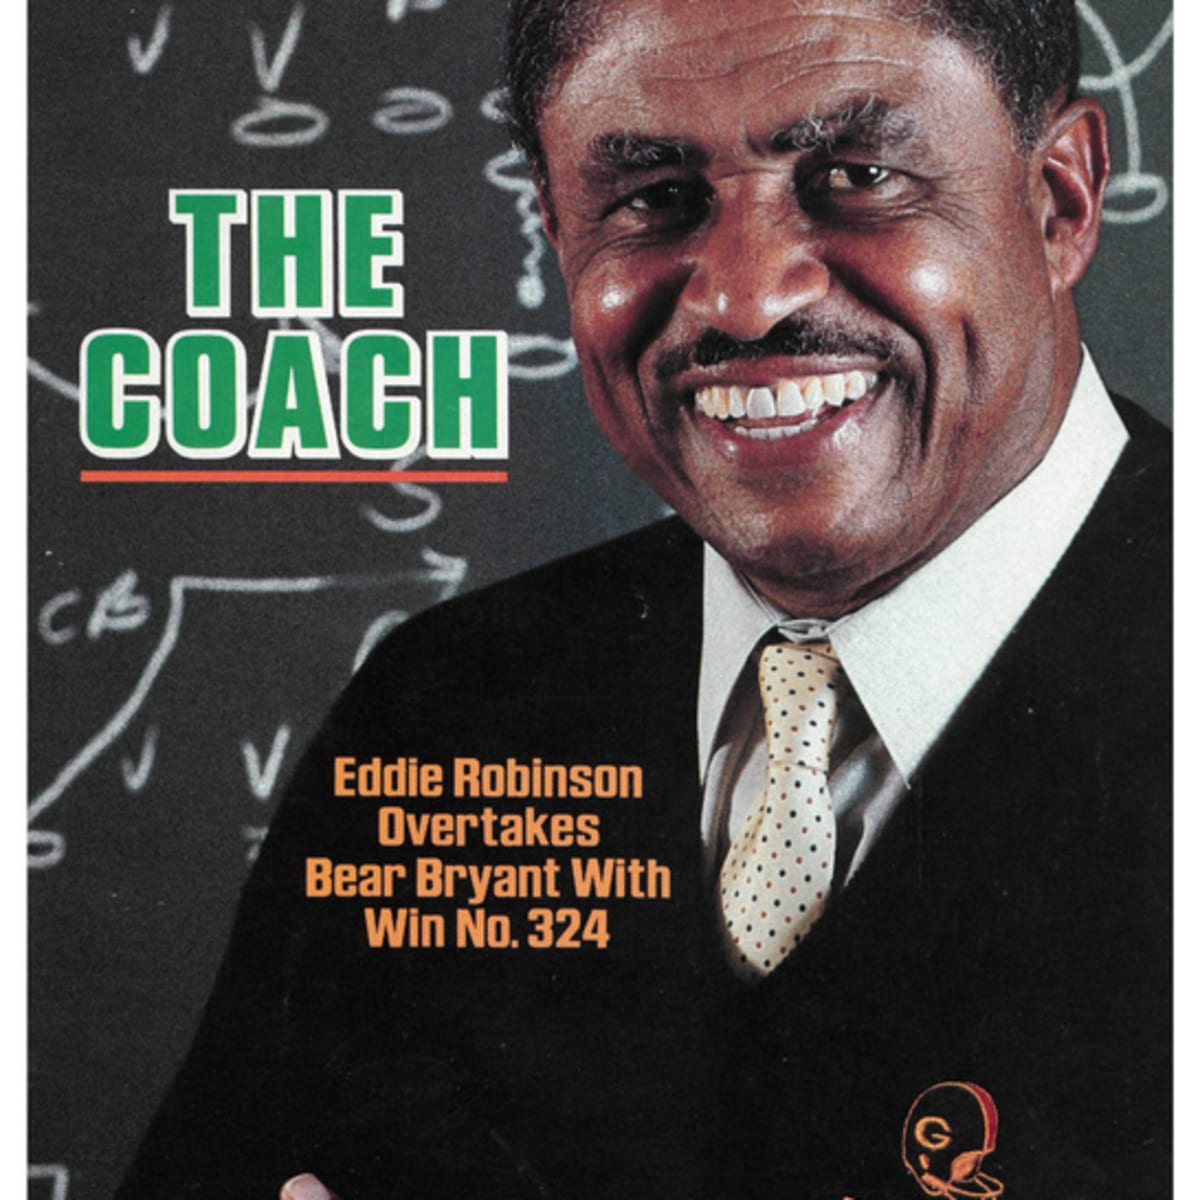 Tale of the Coaching Tape-Nick Saban-Eddie Robinson - Sports Illustrated  Alabama Crimson Tide News, Analysis and More